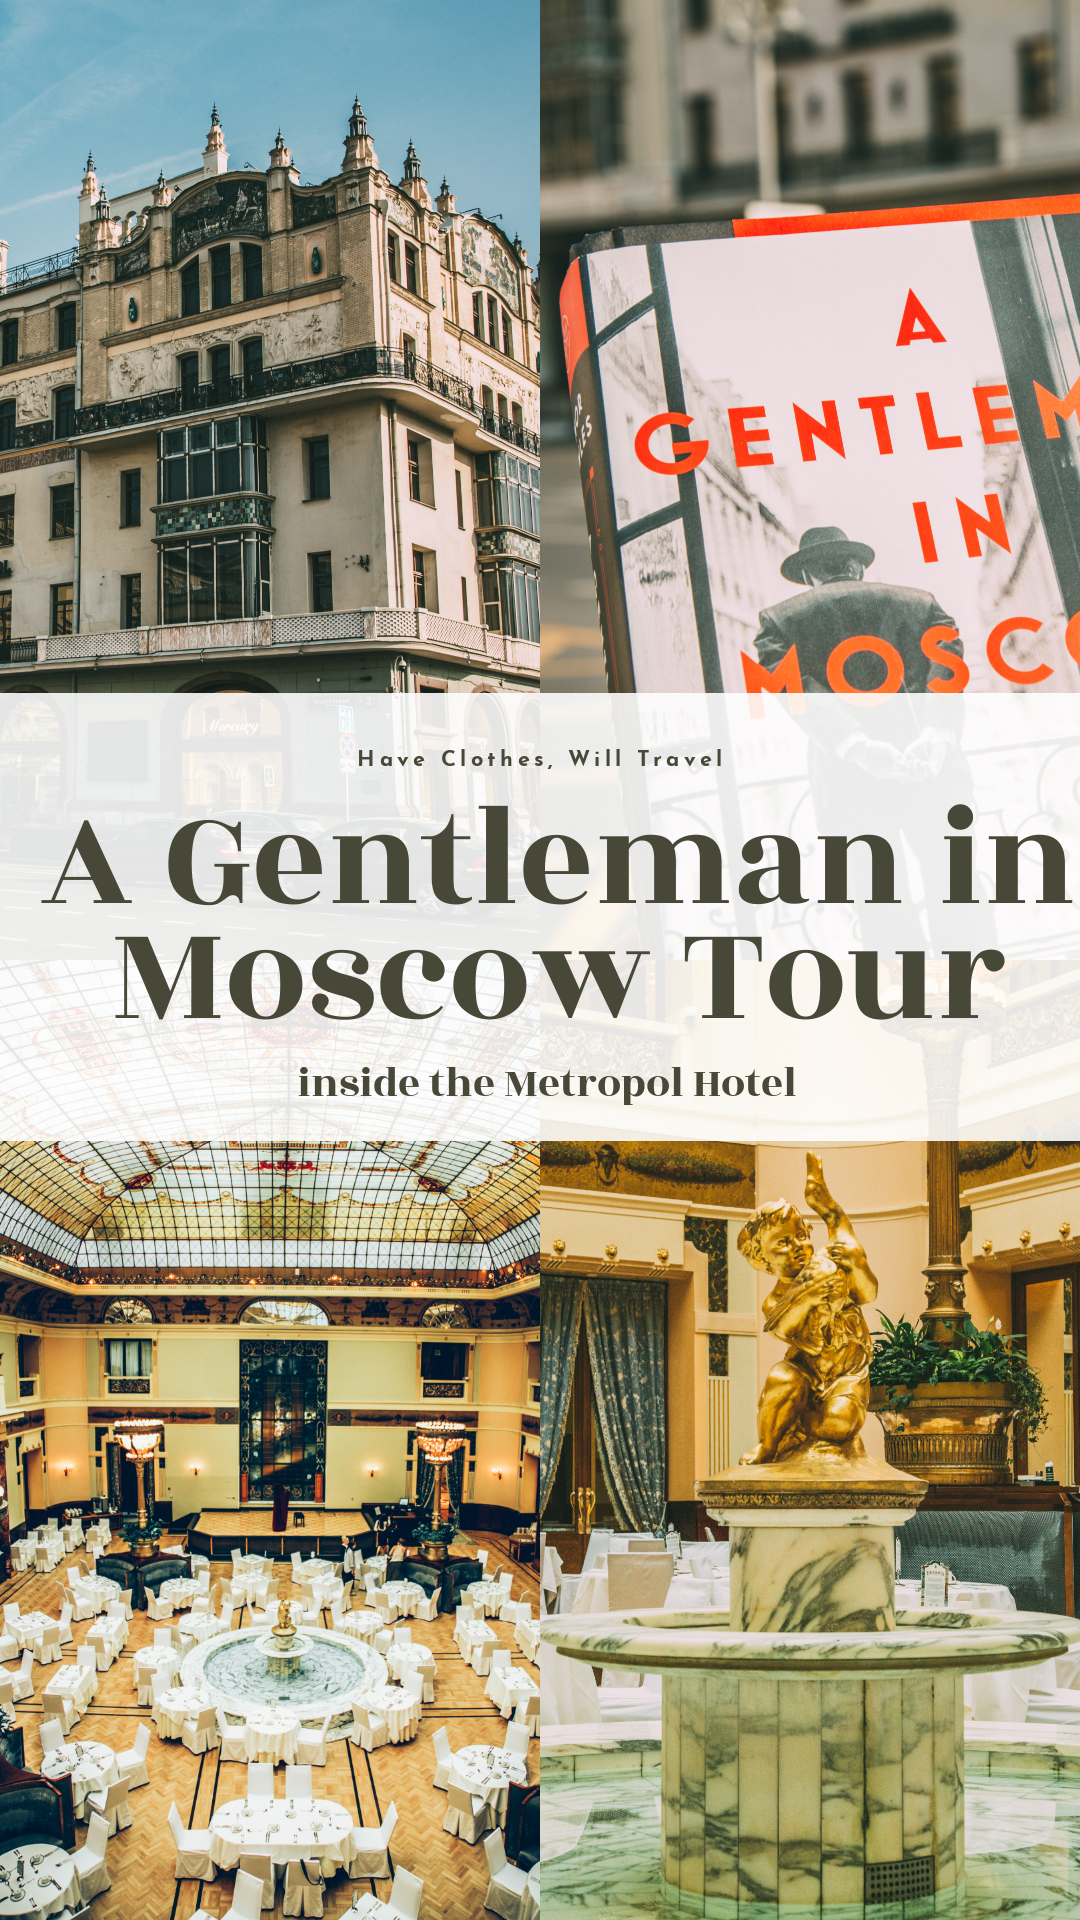 A collage of images taken during the Gentleman in Moscow tour at the Metropol Hotel in Moscow, Russia, with a banner of text across the center of the graphic.